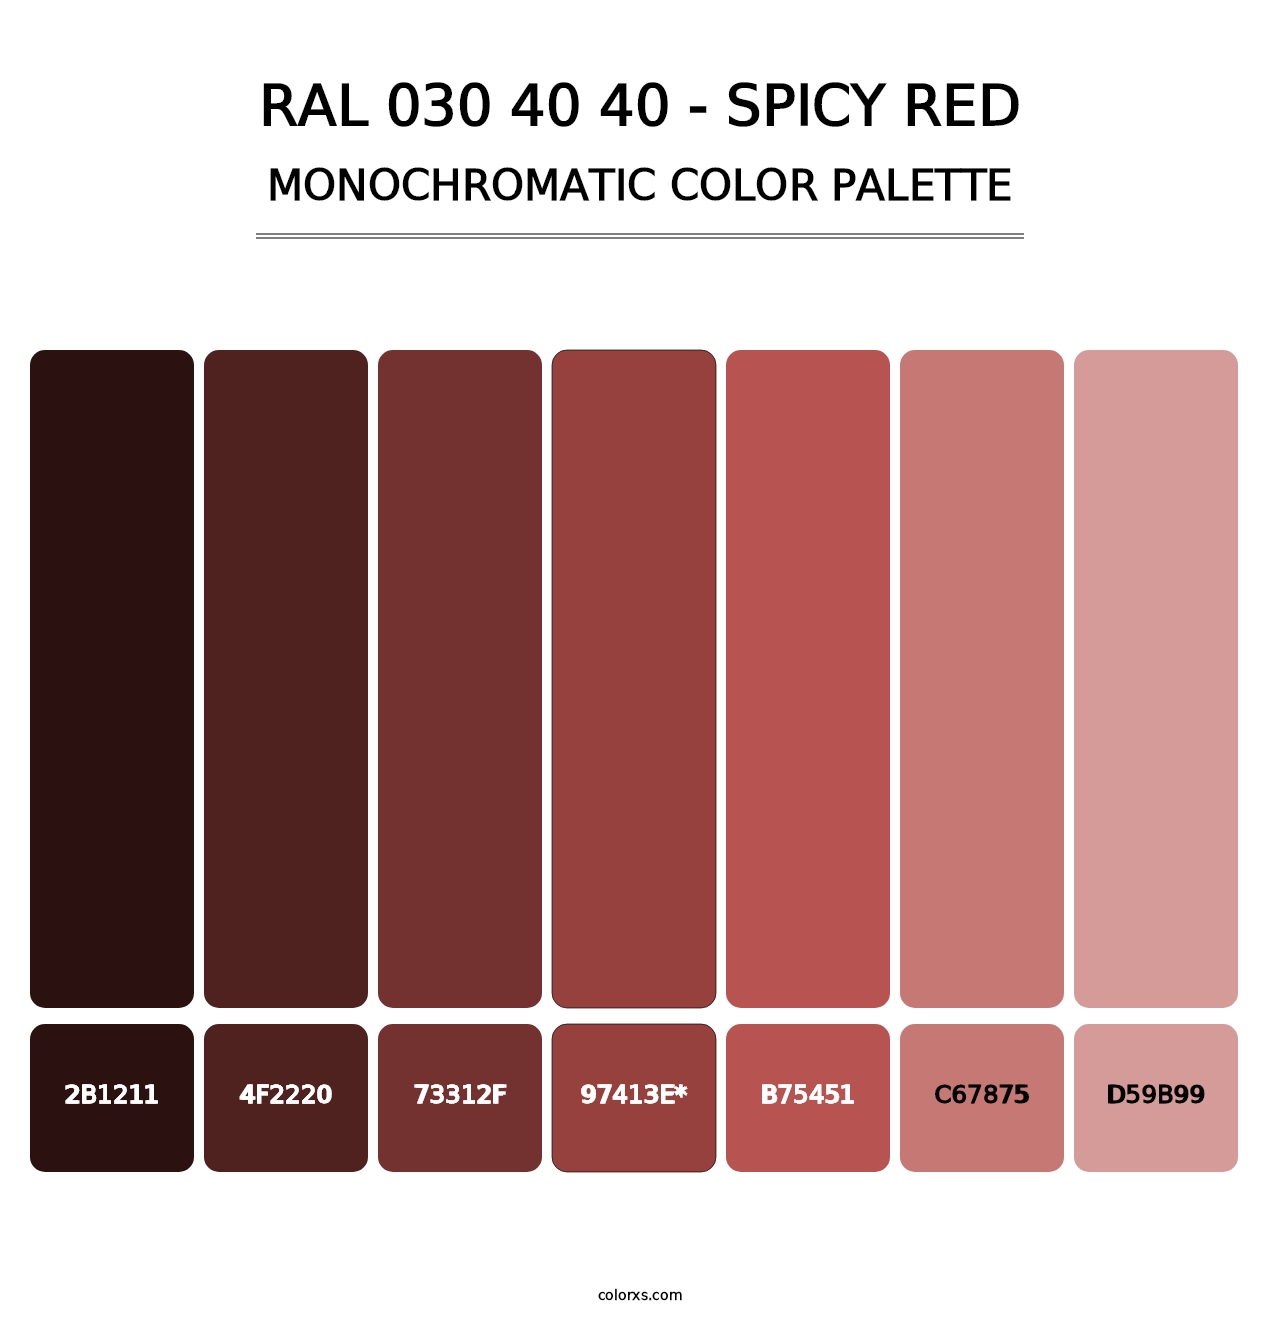 RAL 030 40 40 - Spicy Red - Monochromatic Color Palette